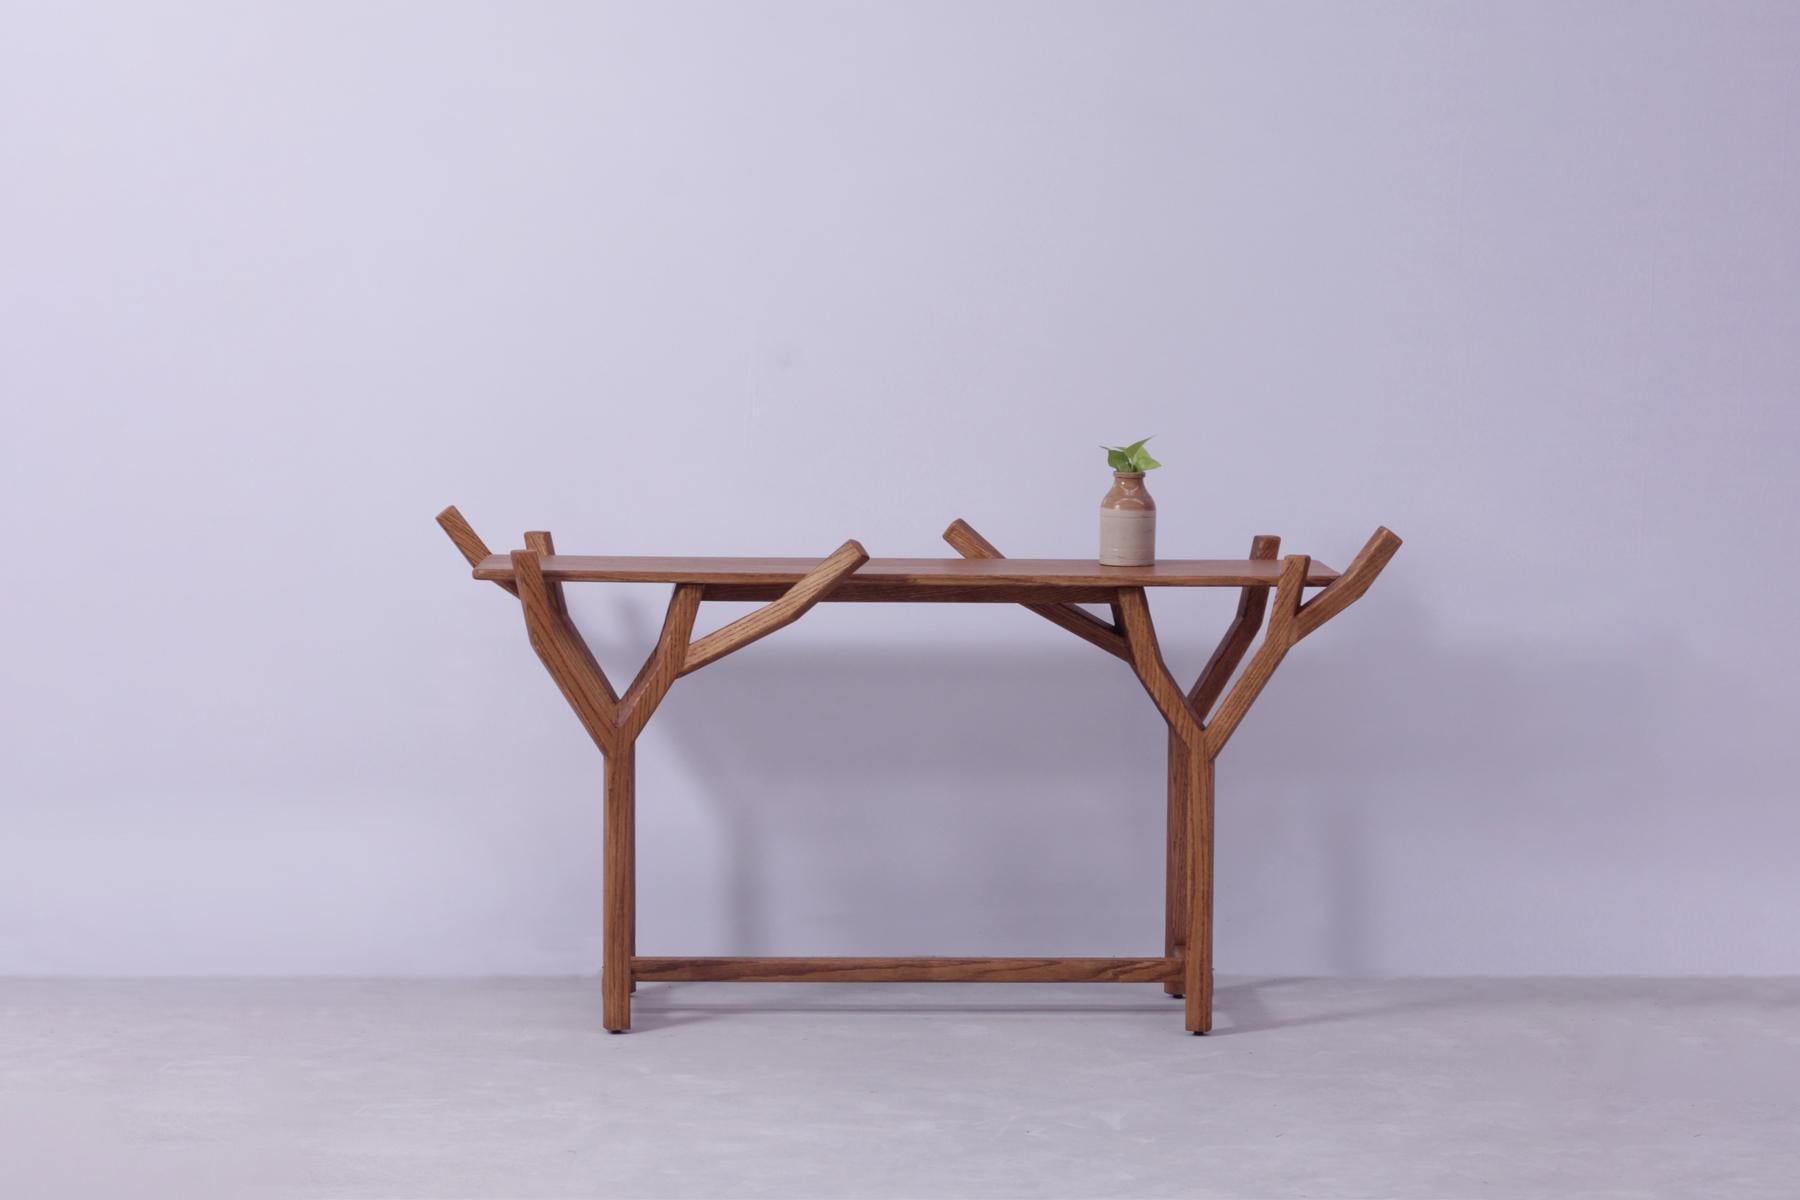 TOTEM is a sculptural and organic statement console table in Solid Oak wood, created inspired by the exemplary beauty and winding ascents of trees in nature, with an uncomplicated minimal aesthetic. The console table holds a complex construction in